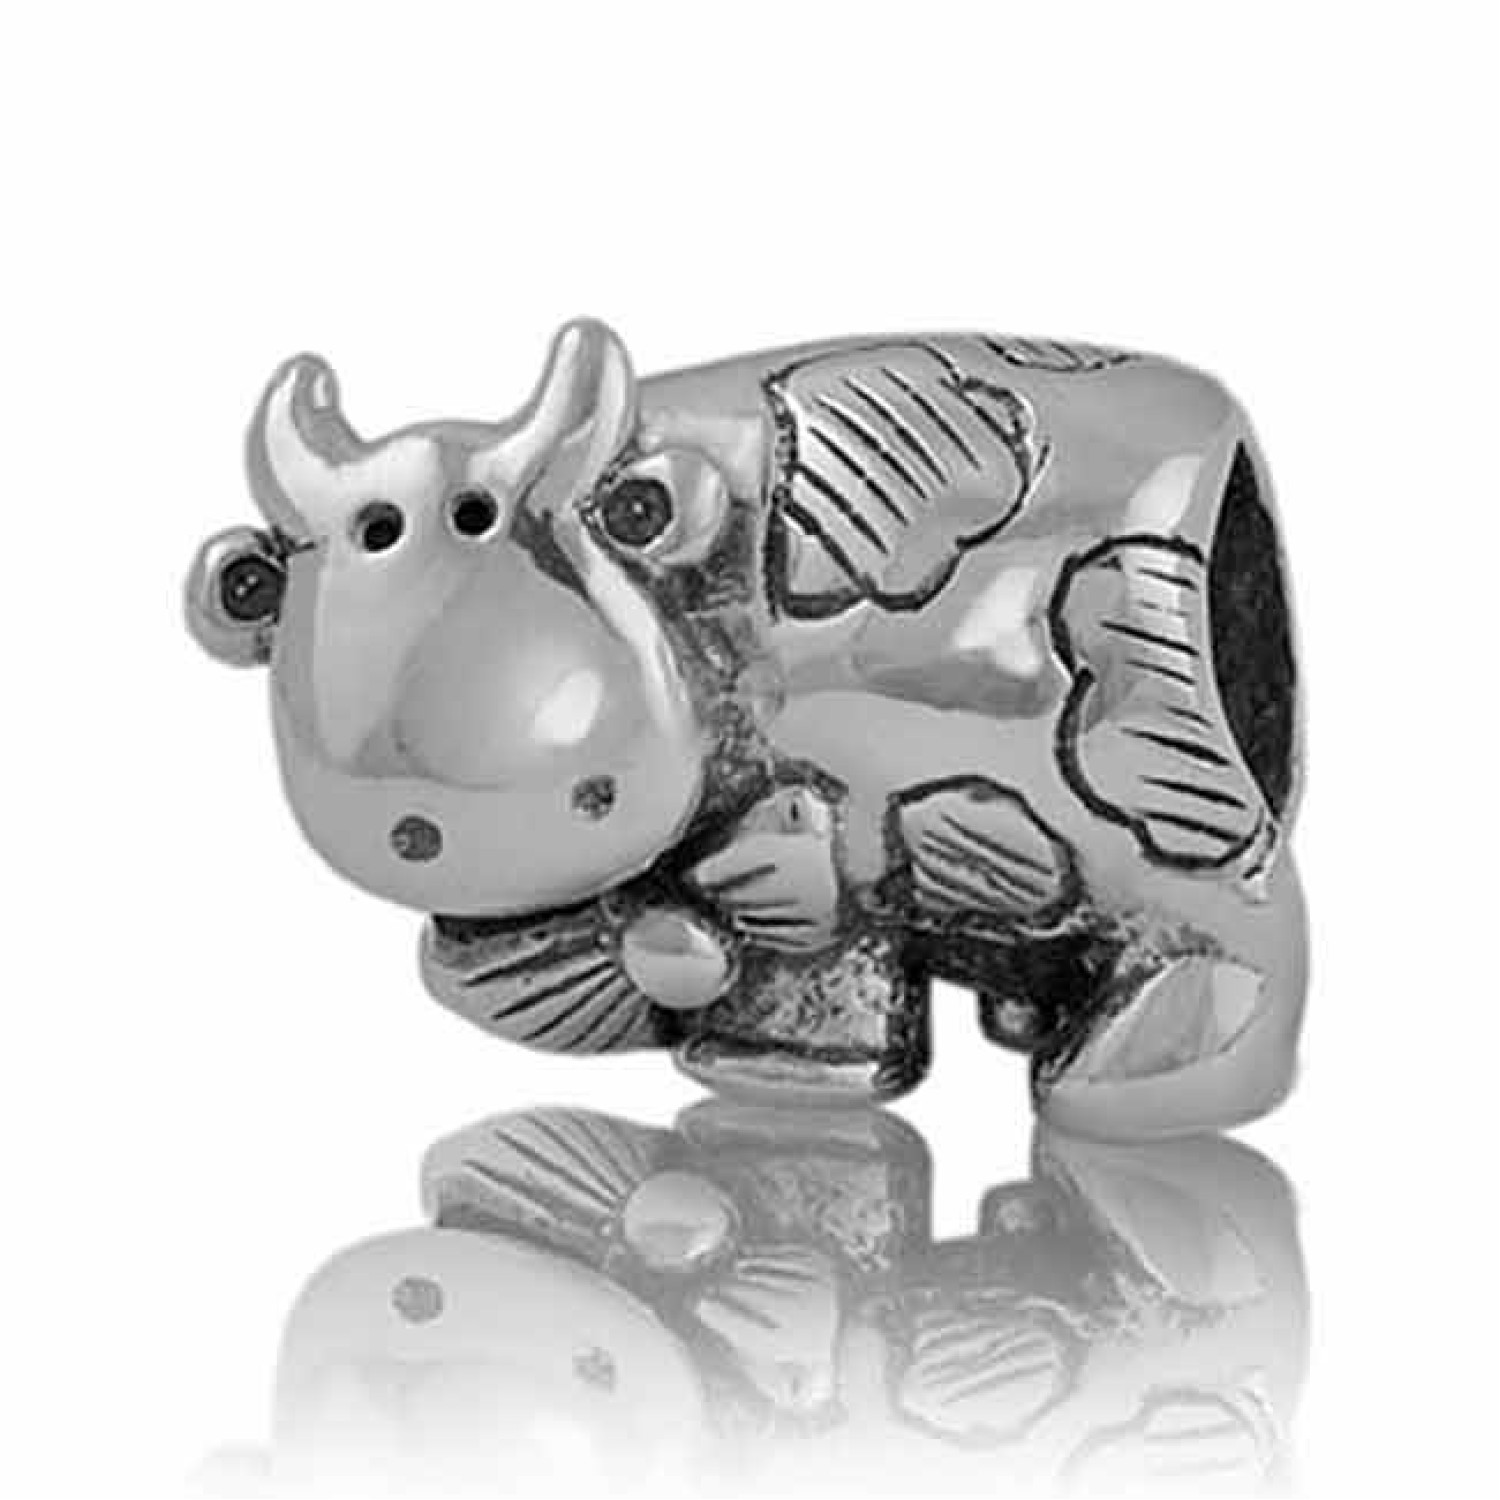 LK098 Evolve Daisy Cow Charm. Evolve New Zealand LK098 Evolve Daisy Cow. Our Places, Our memories  The cow is a symbol of New Zealand farming and Dairying Sterling Silver Christies exclusive 5 year guarantee fits other major brands of Bracele @christies.o